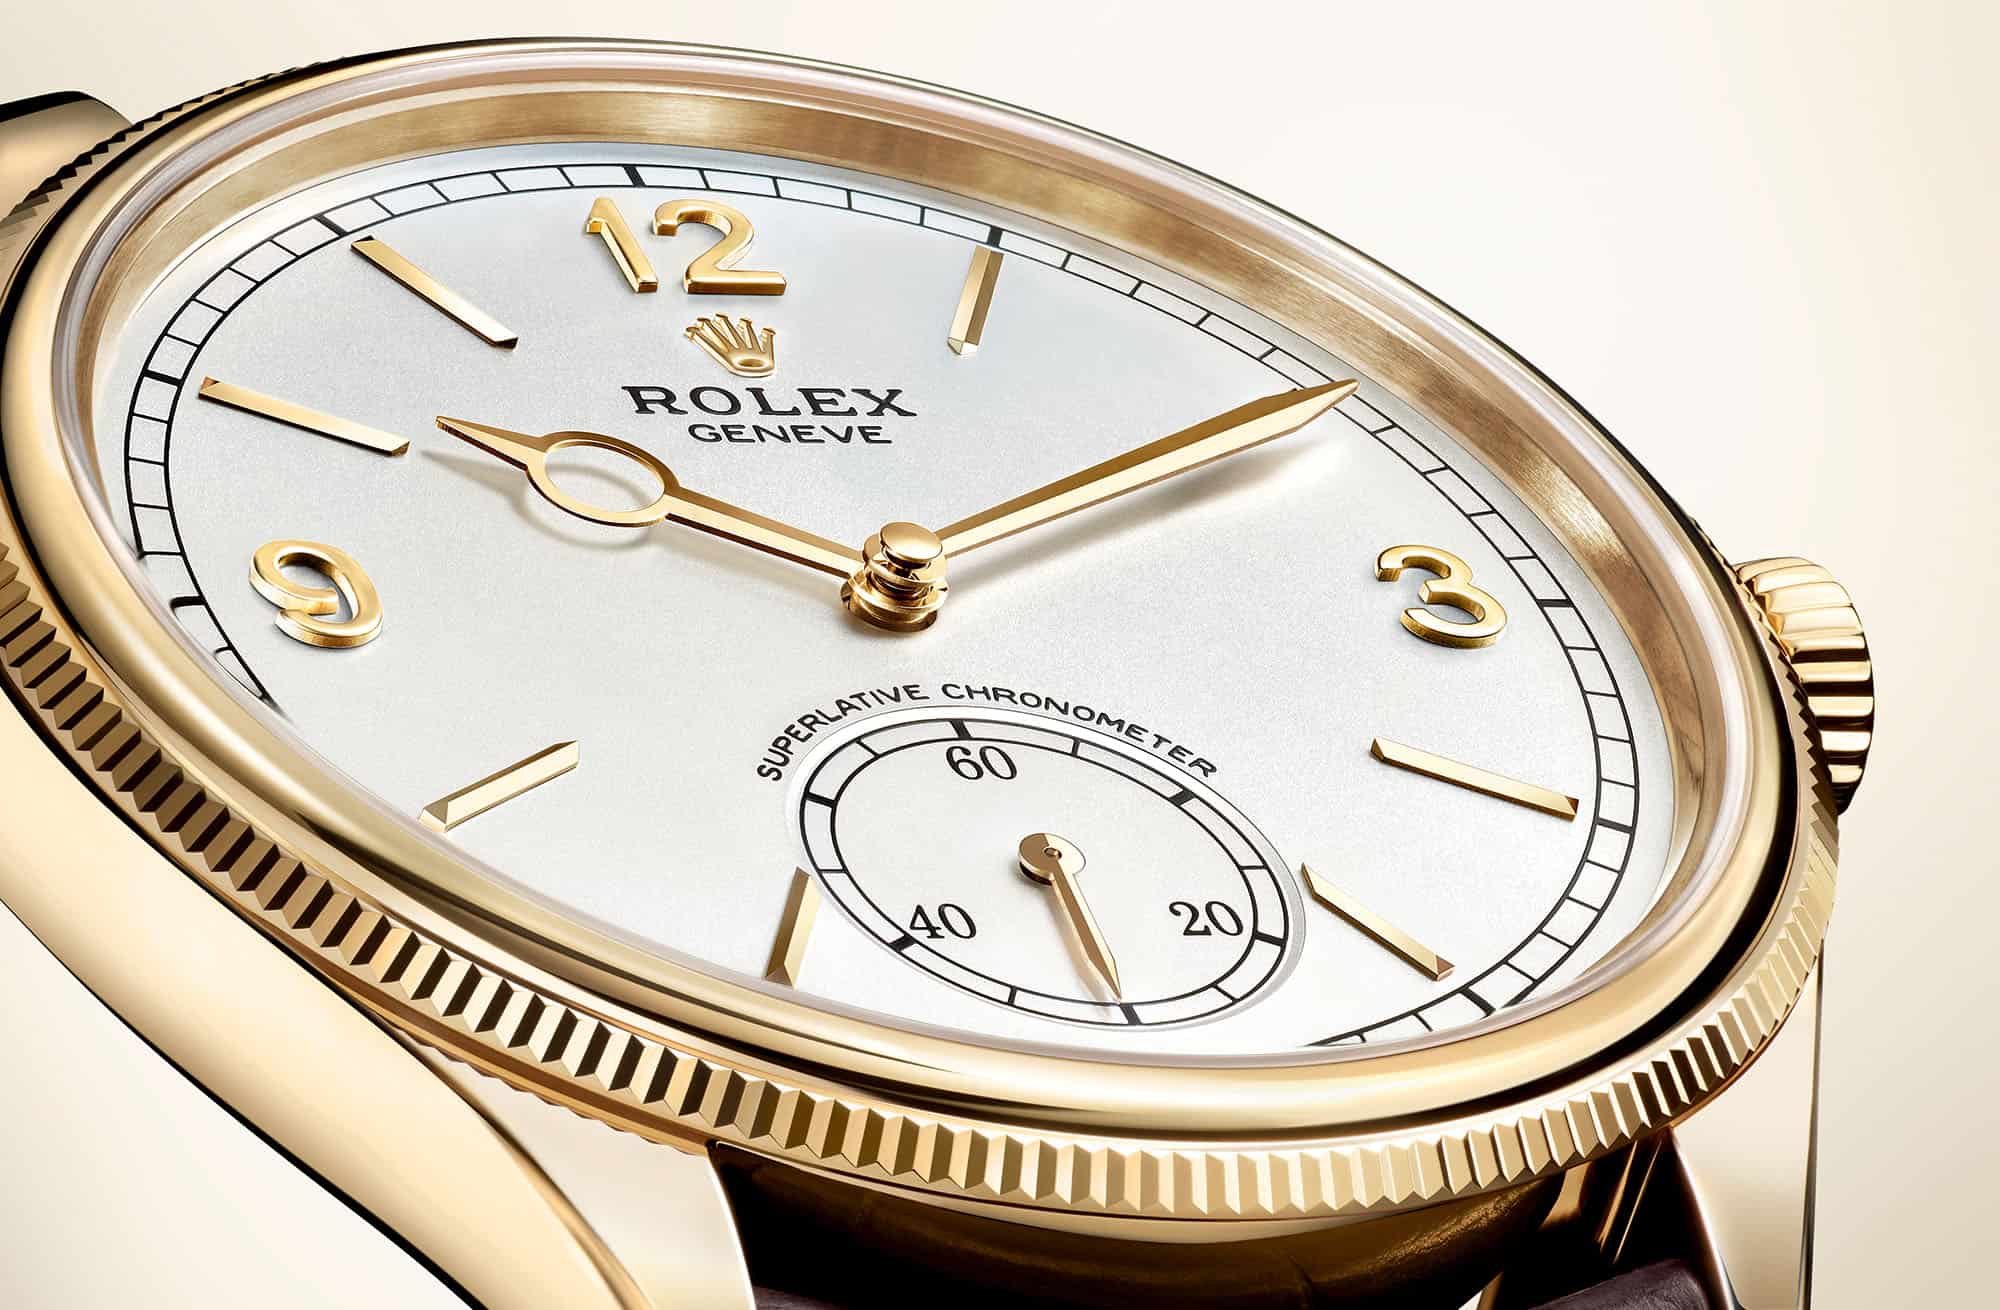 Rolex Reveals New Formal Collection With 1908 - Worn & Wound